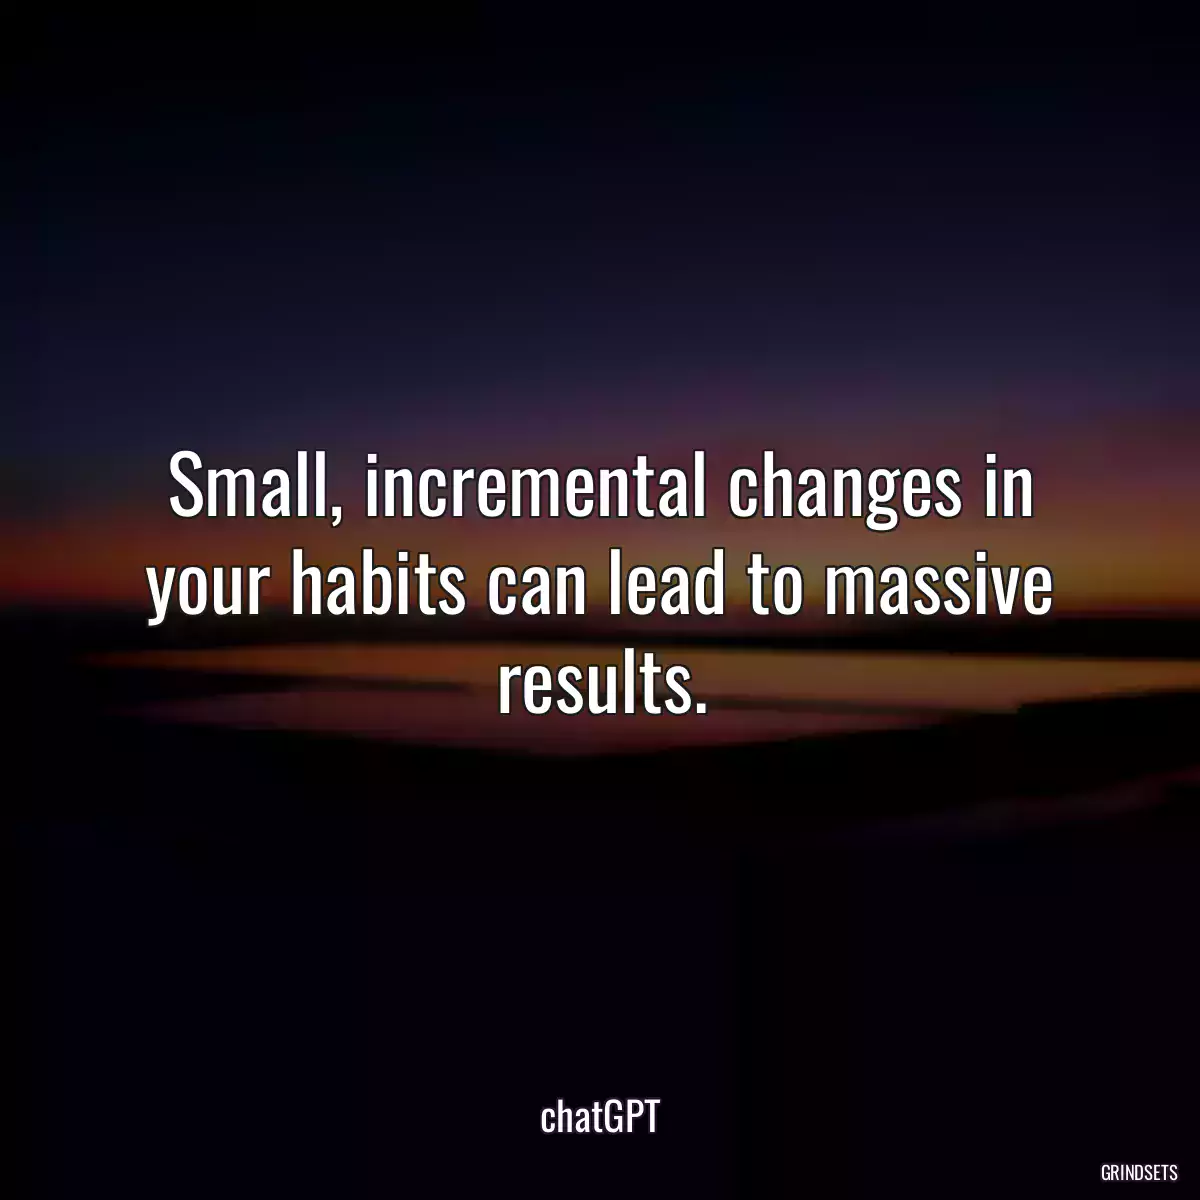 Small, incremental changes in your habits can lead to massive results.